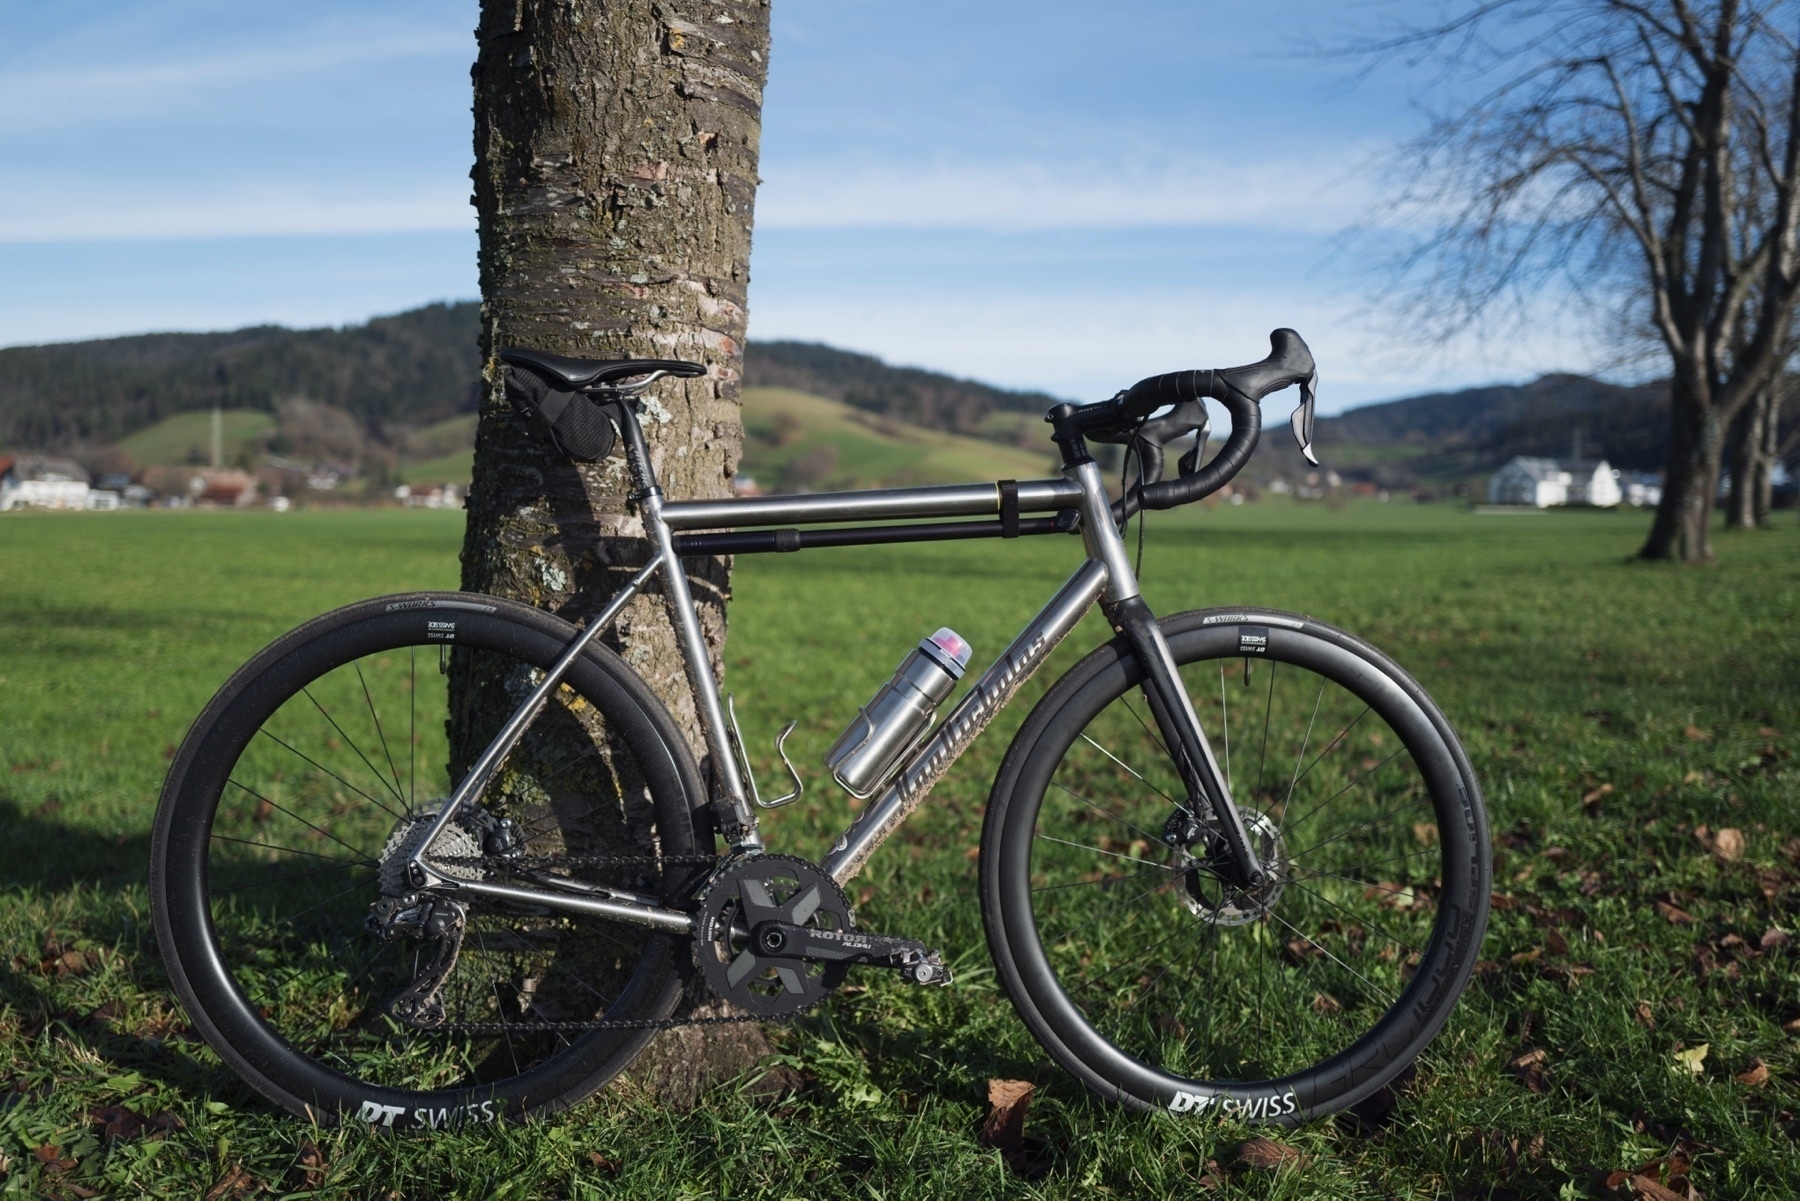 Unpainted titanium road bike with a black carbon fork leaning against a tree on a meadow. The bike is dirty and covered in mud. The blurry background shows hills with grass and forests.